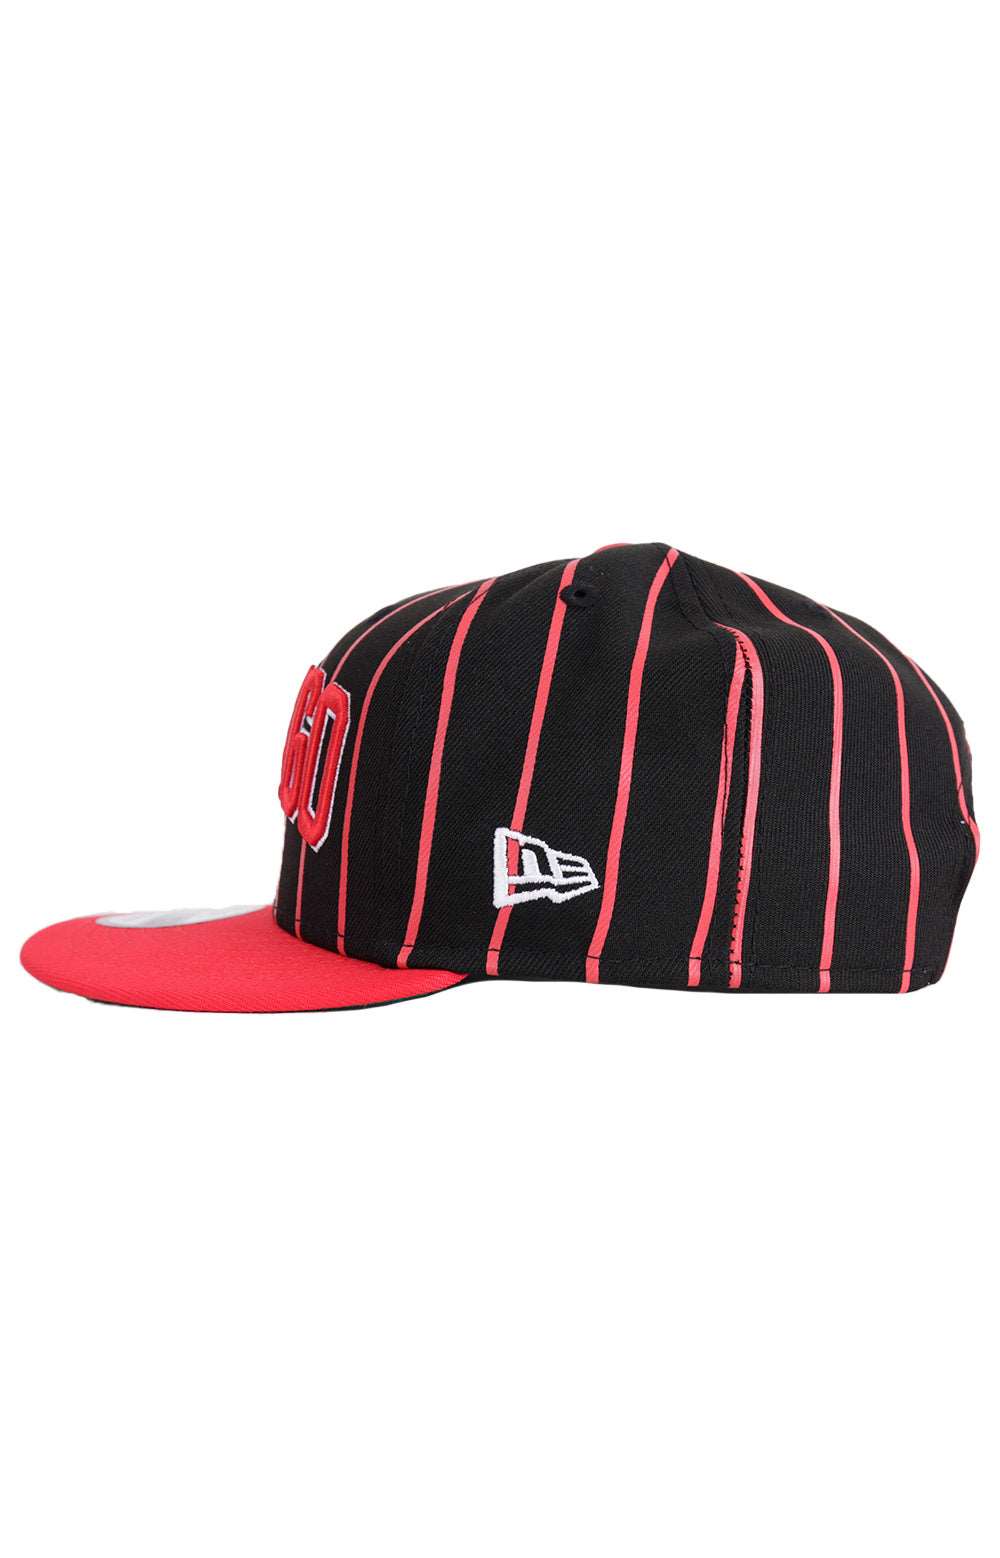 Chicago Bulls City Arch 950 Snap-Back Hat